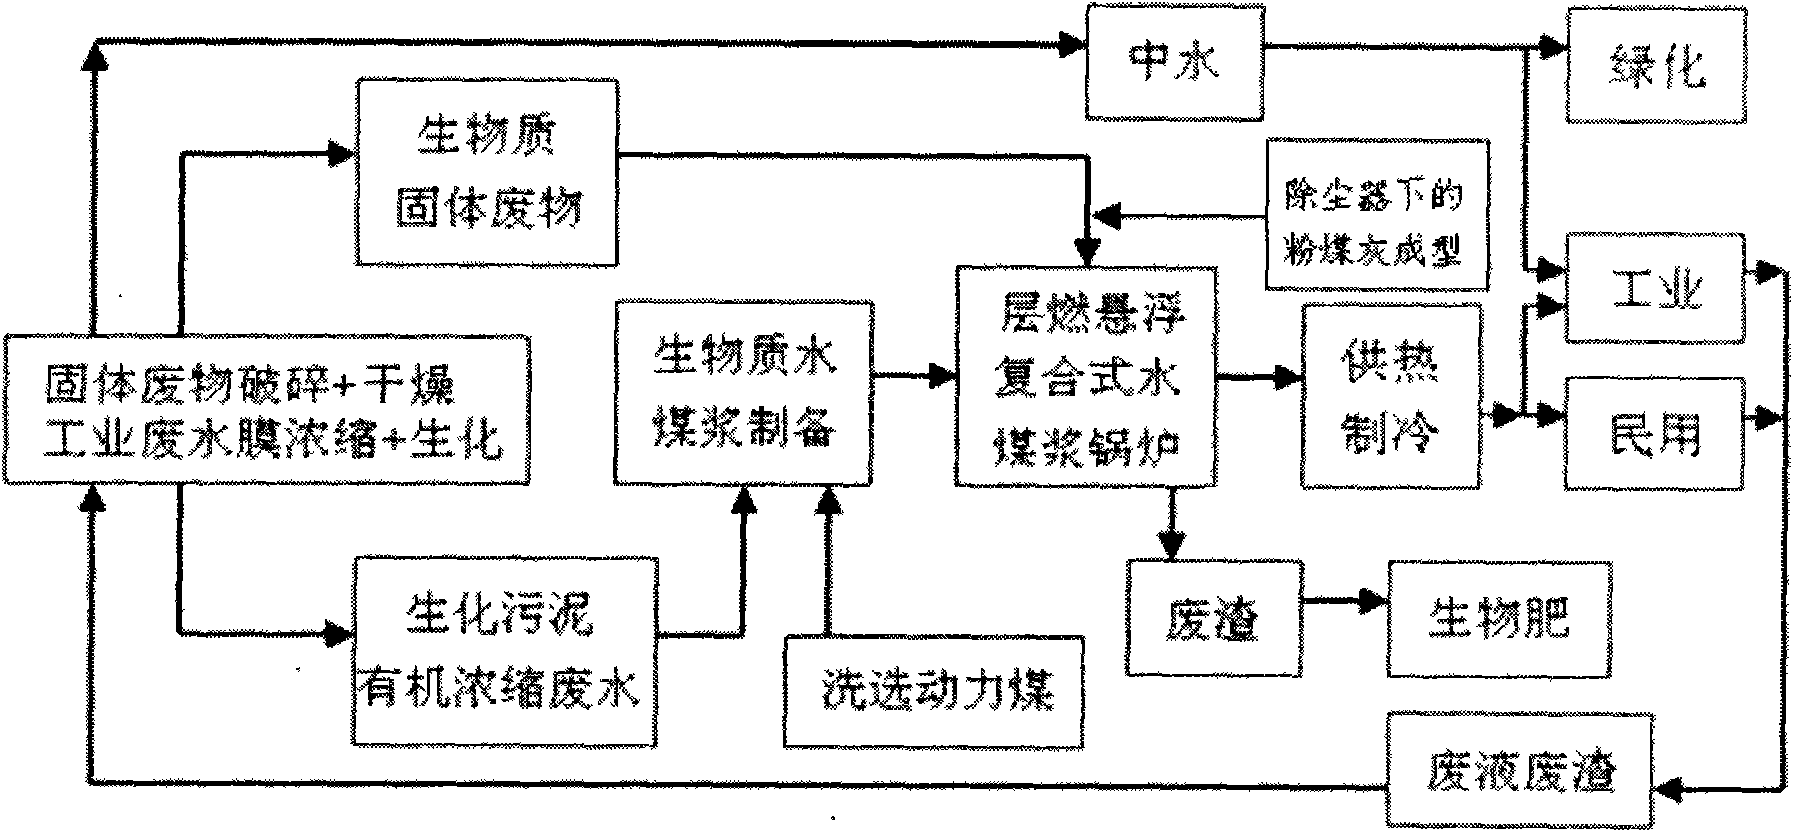 Biomass water-coal-slurry slurring and combustion method and integrated system